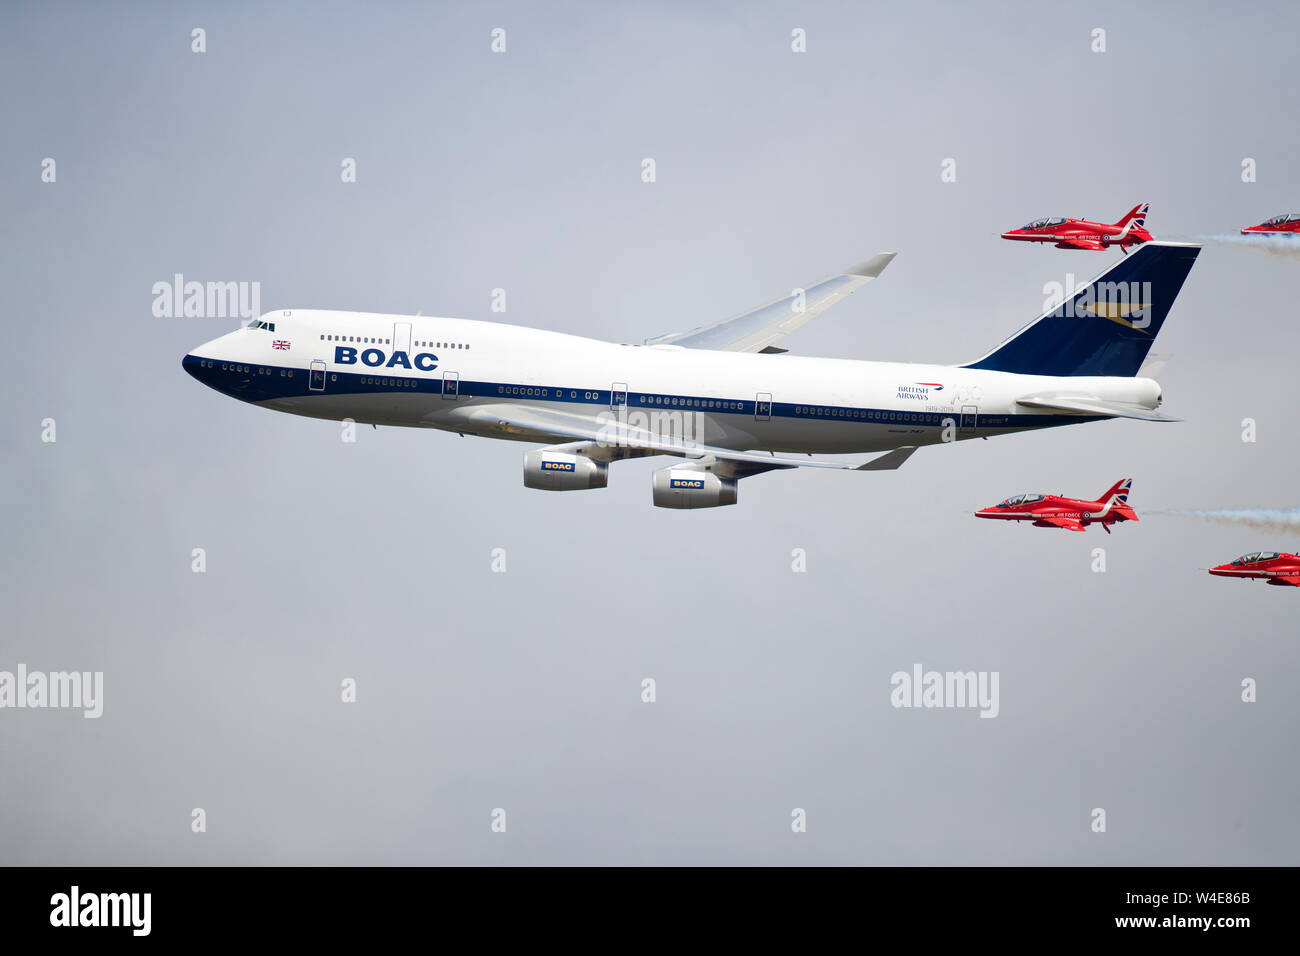 Boeing 747-436 flying with the Red Arrows at the 2019 RIAT air show Fairford, Gloucestershire, U.K. commemorating the 100th anniversary of BOAC Stock Photo